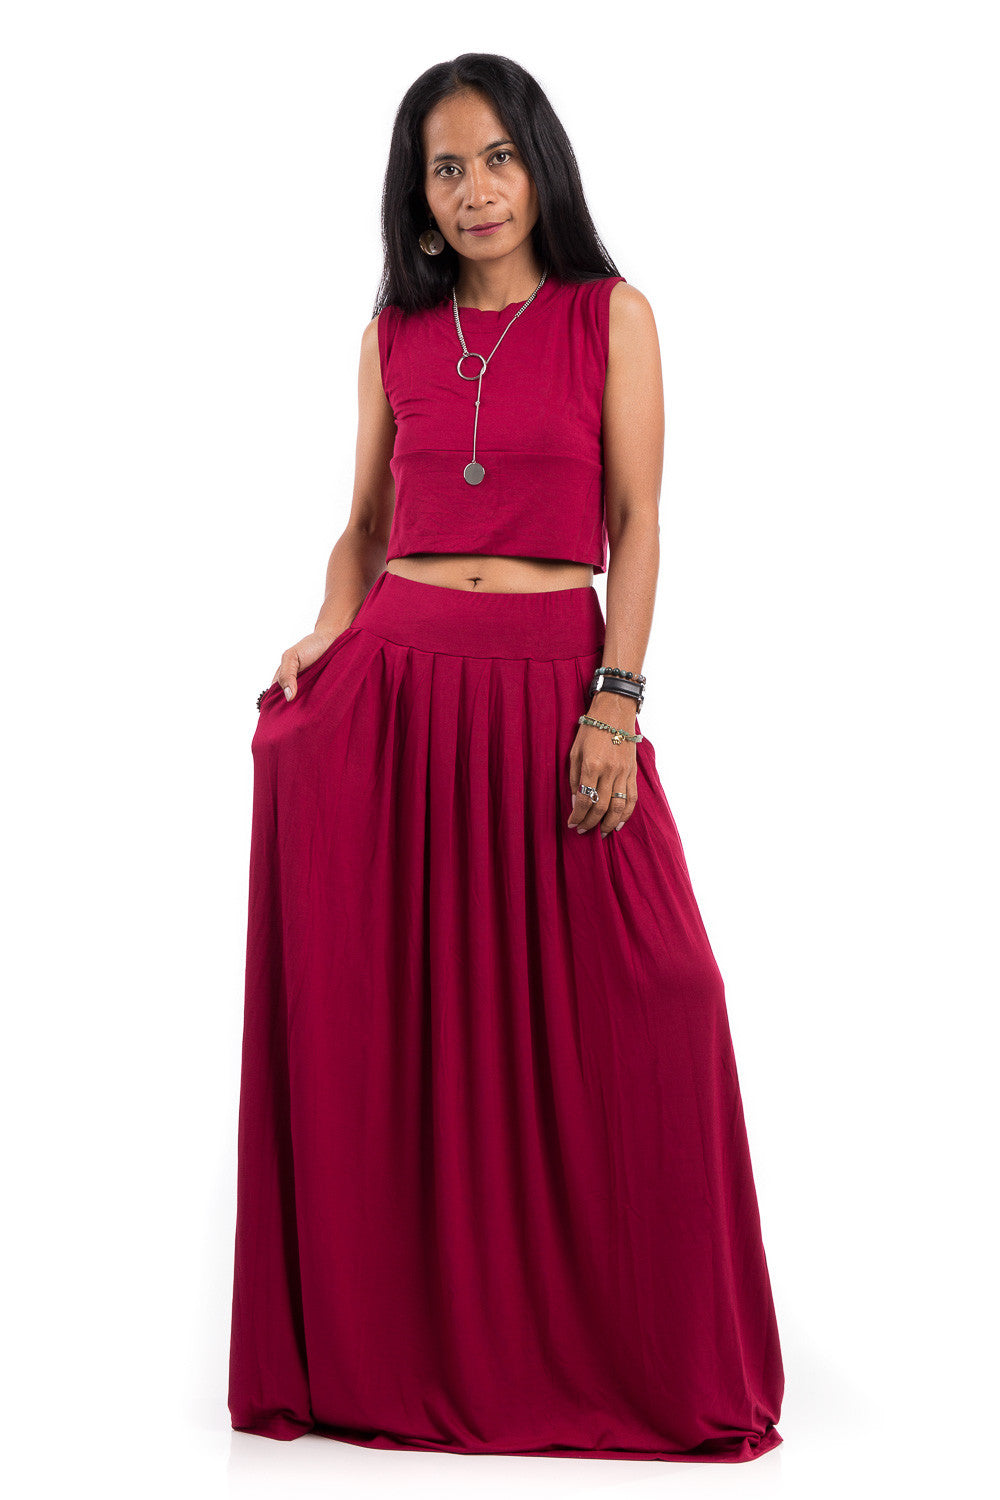 Red maxi skirt.  Long pleated skirt with high waist band and pockets on either side. 